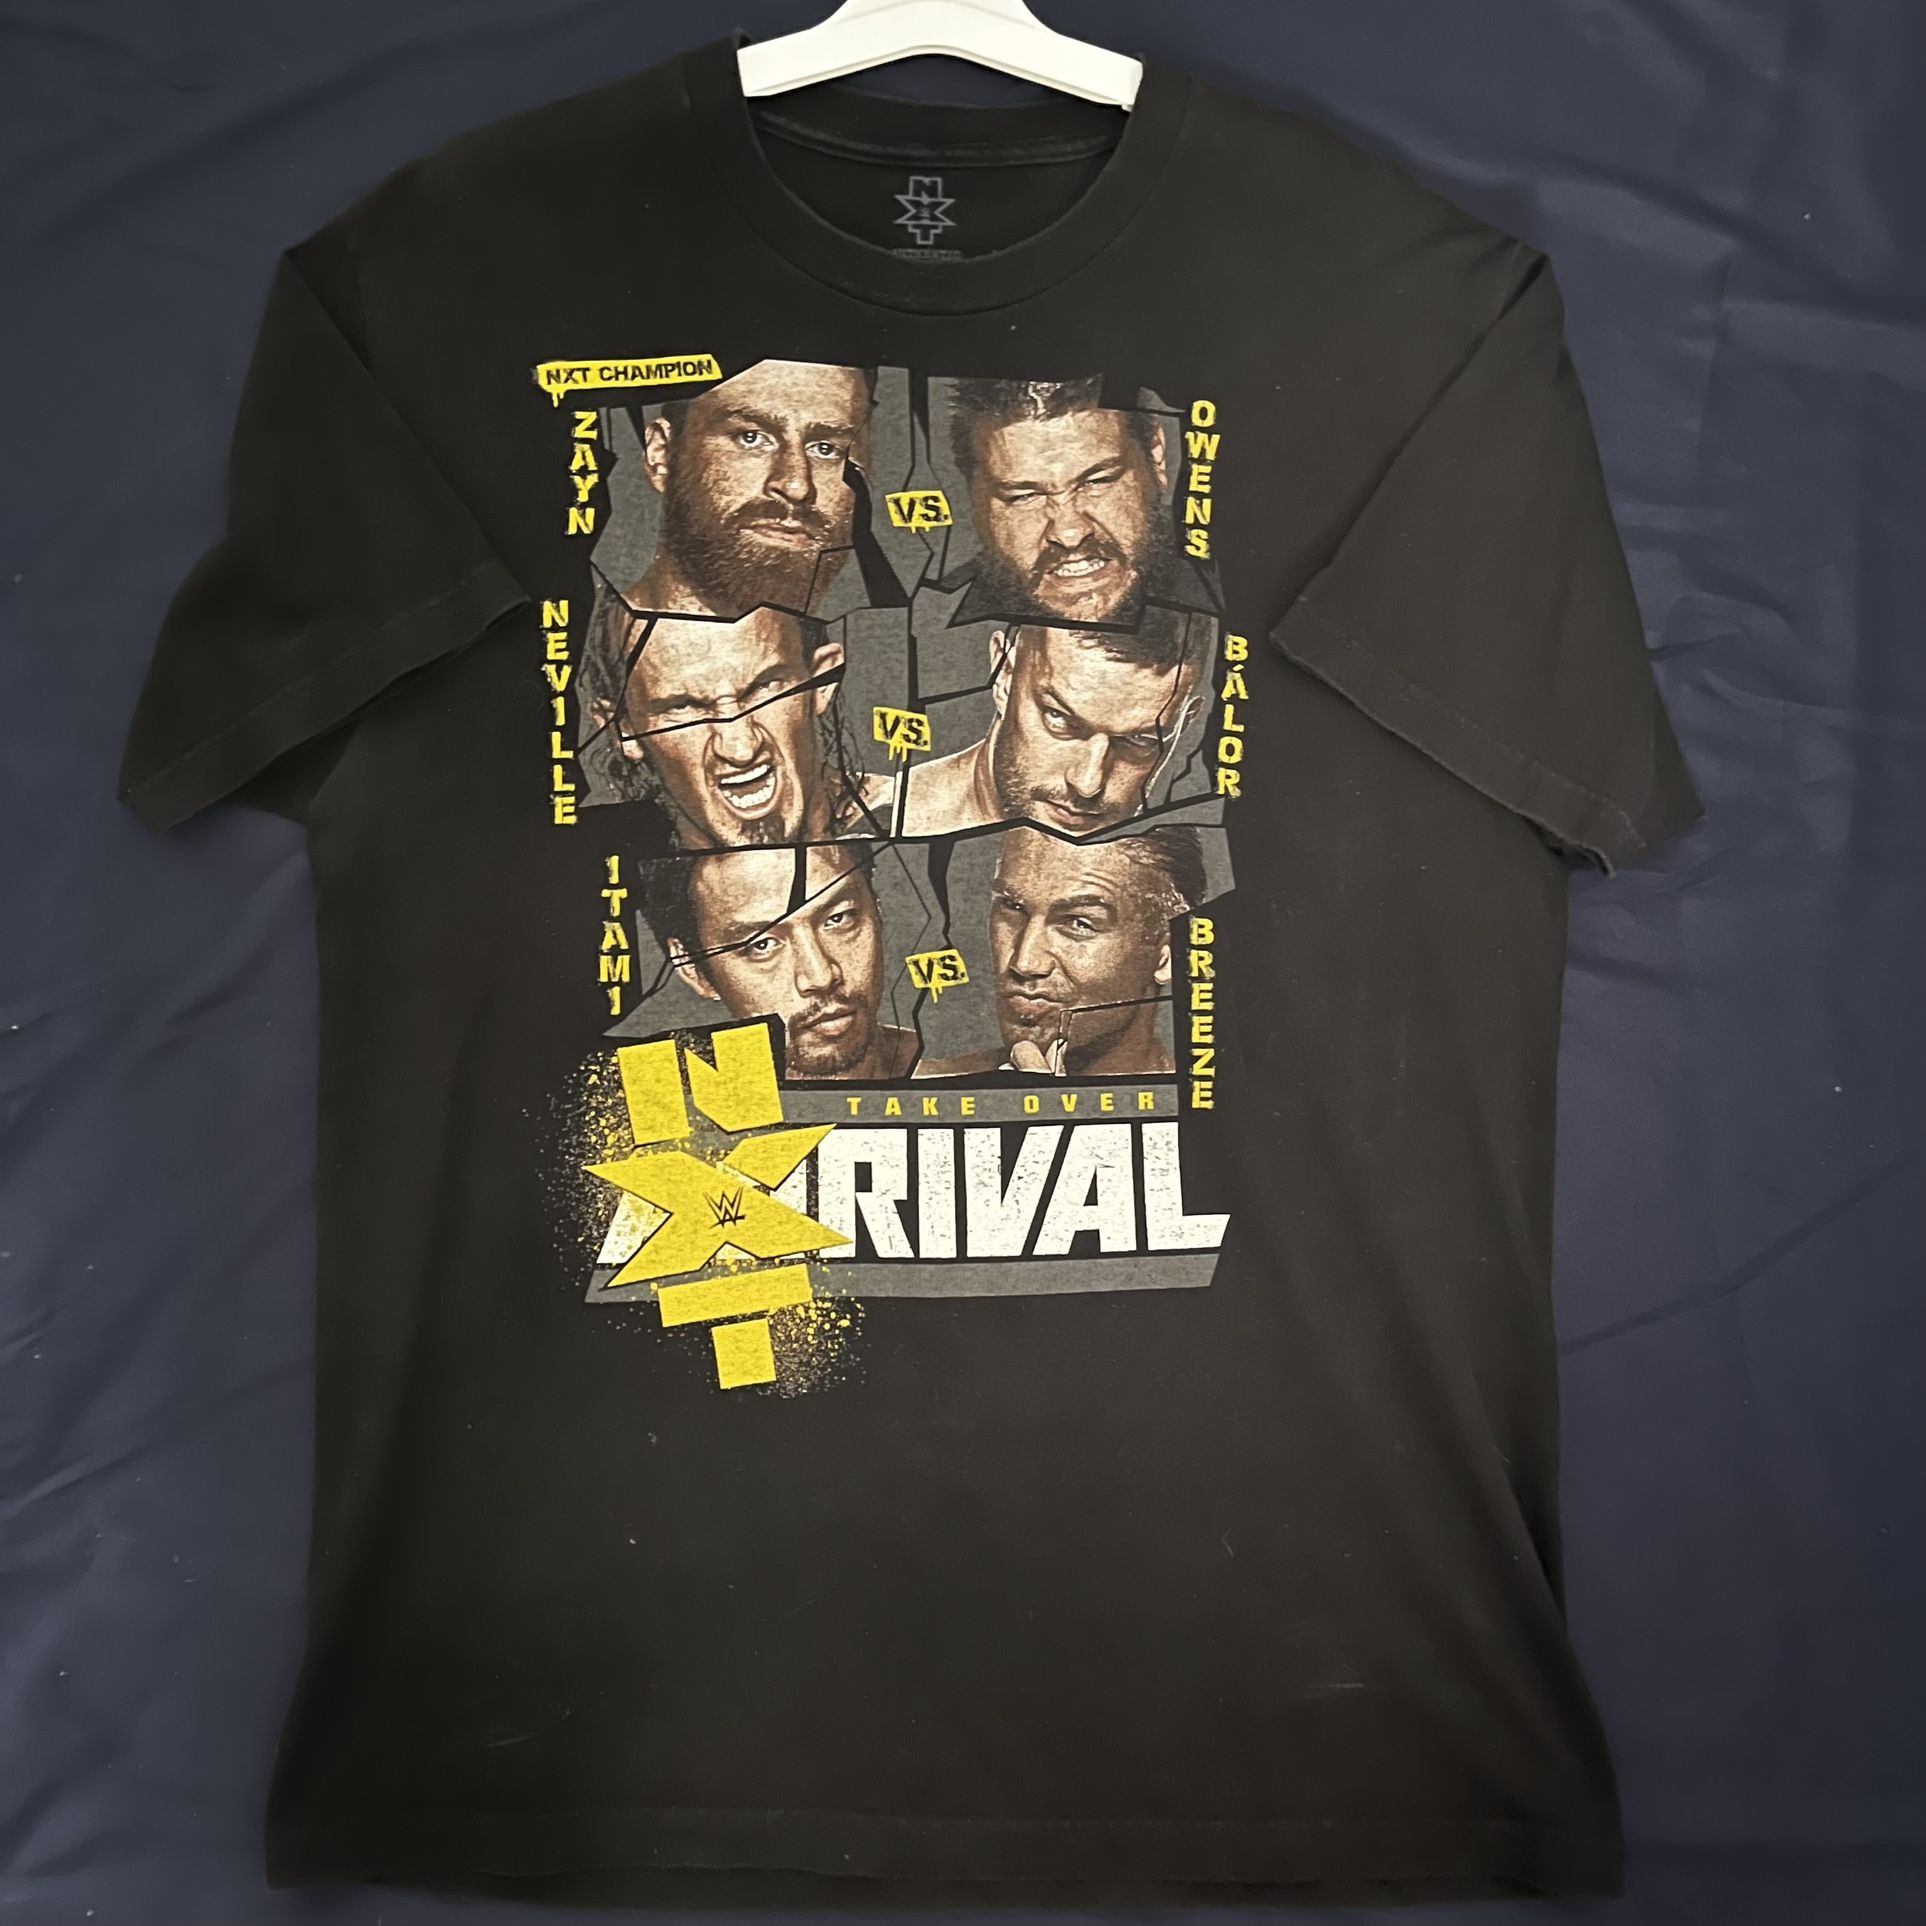 2015 NXT Takeover Rival Shirt